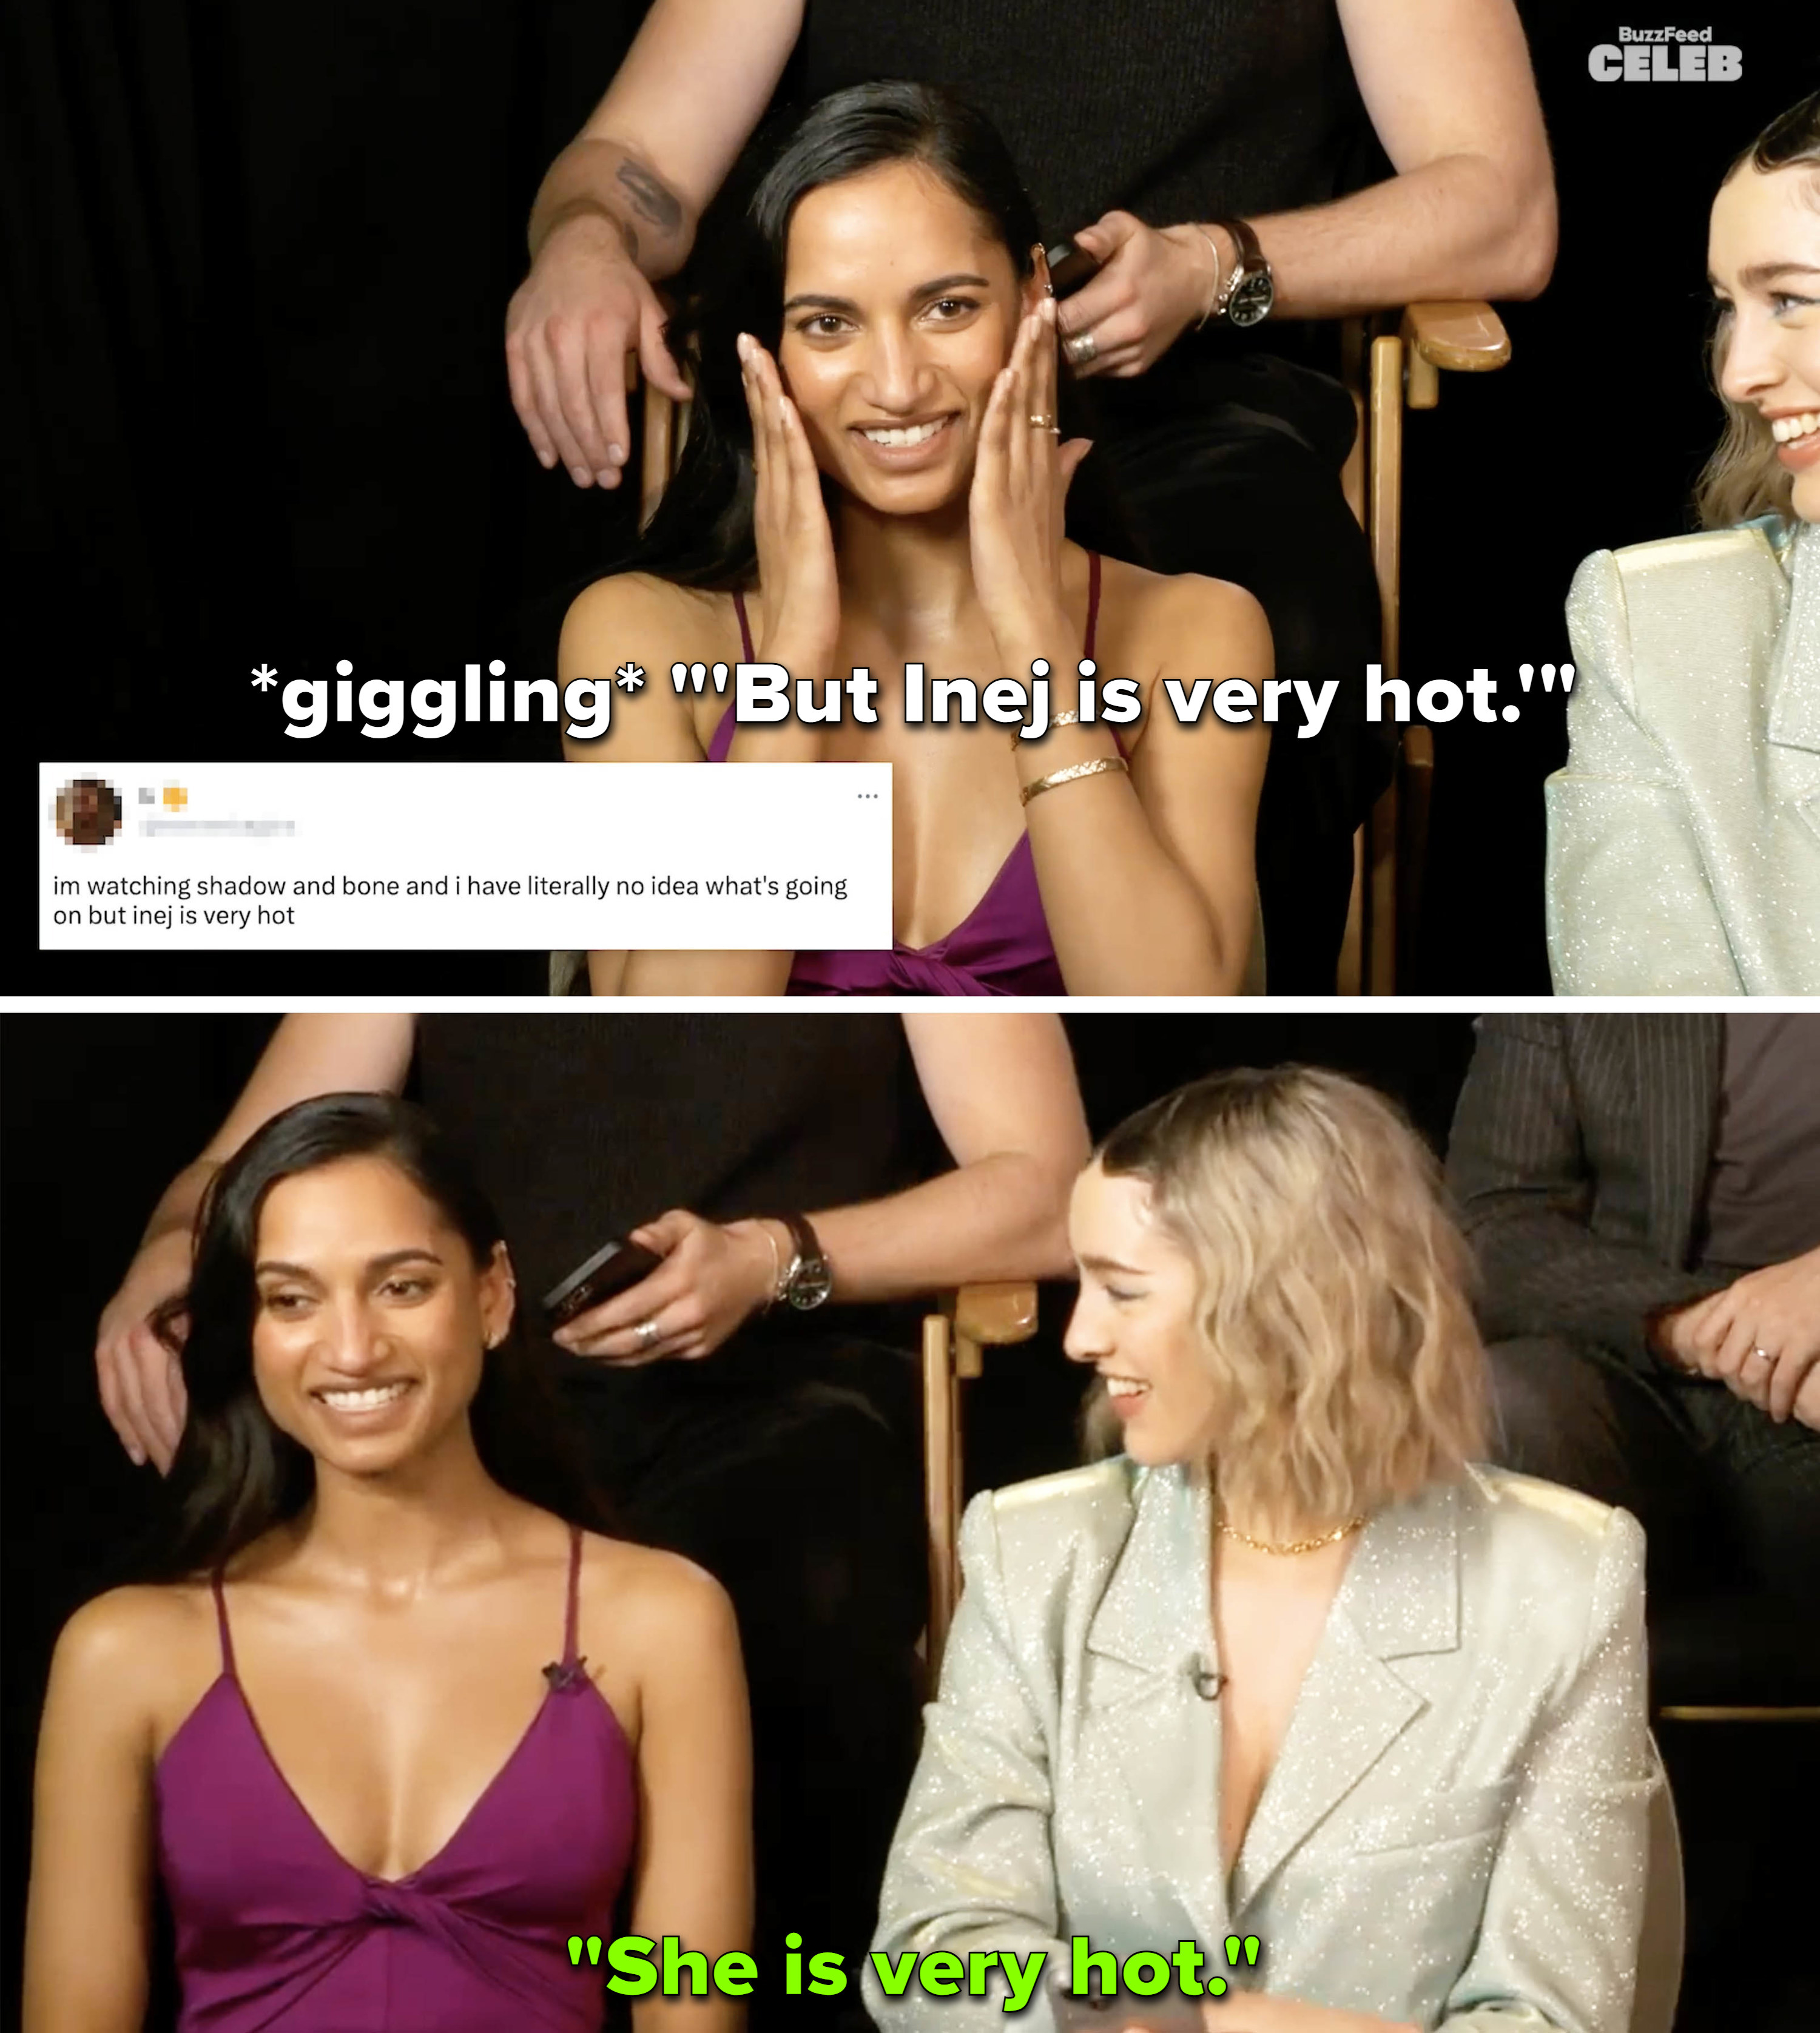 Amita reading a tweet about Inej being hot, and Danielle saying, &quot;She is very hot&quot;